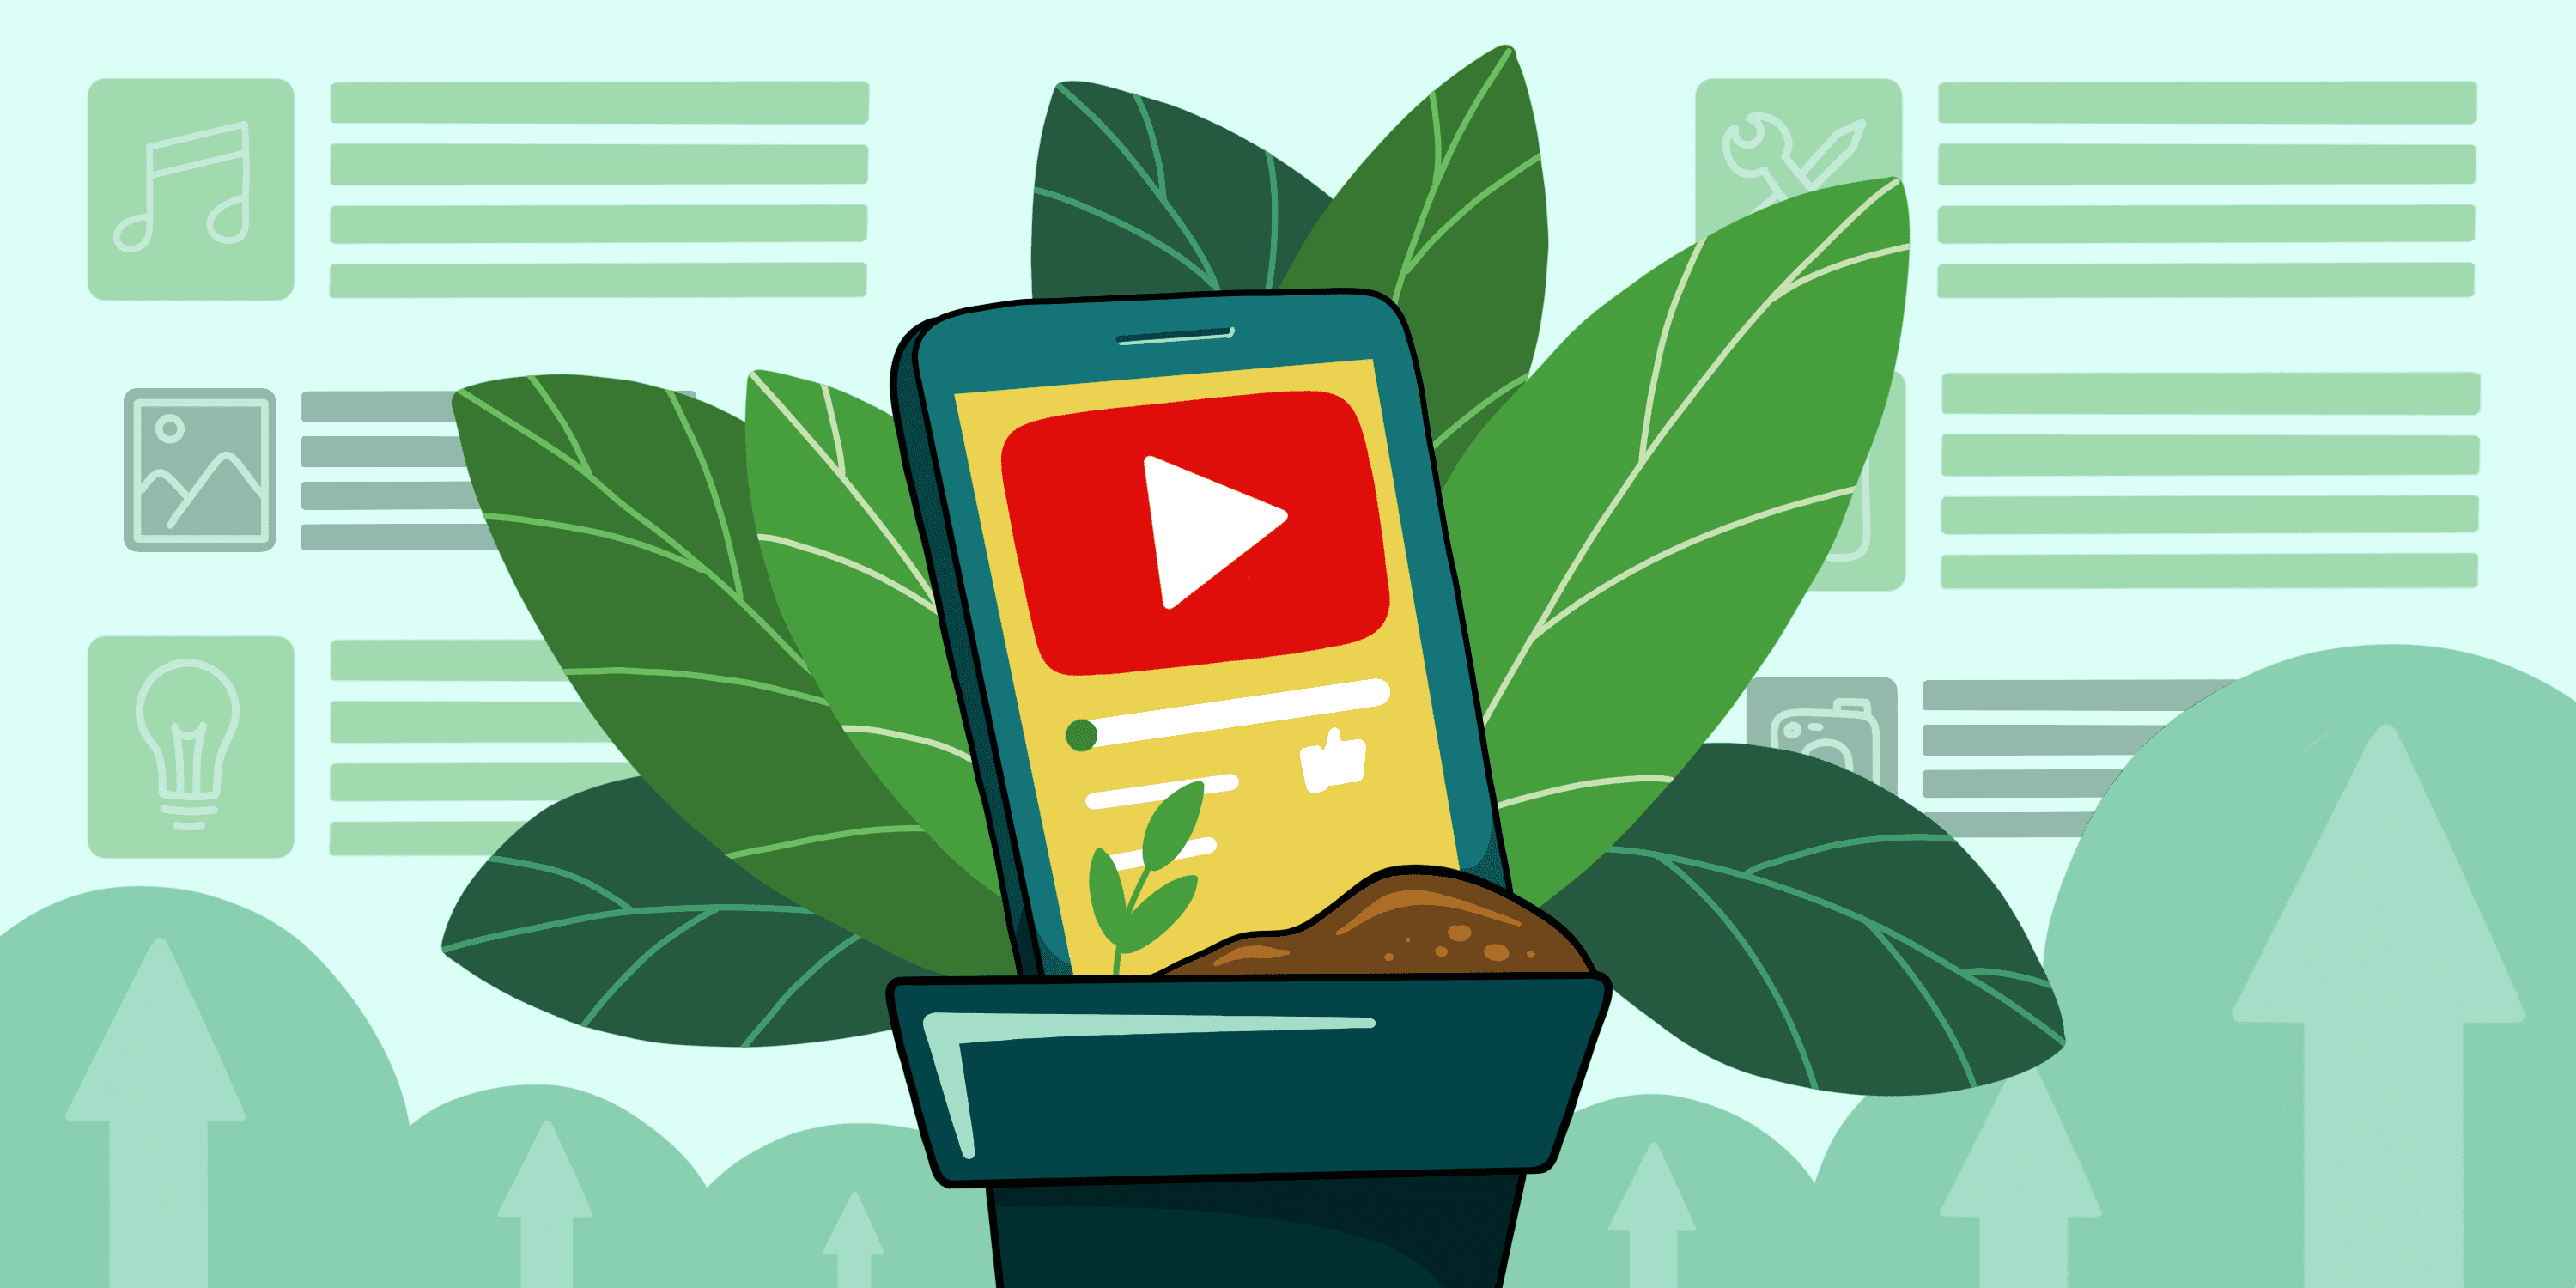 You have probably seen videos that don’t go viral or end up in trends, but at the same time they keep bringing views and subscribers year after year. This type of video is commonly called "evergreen".